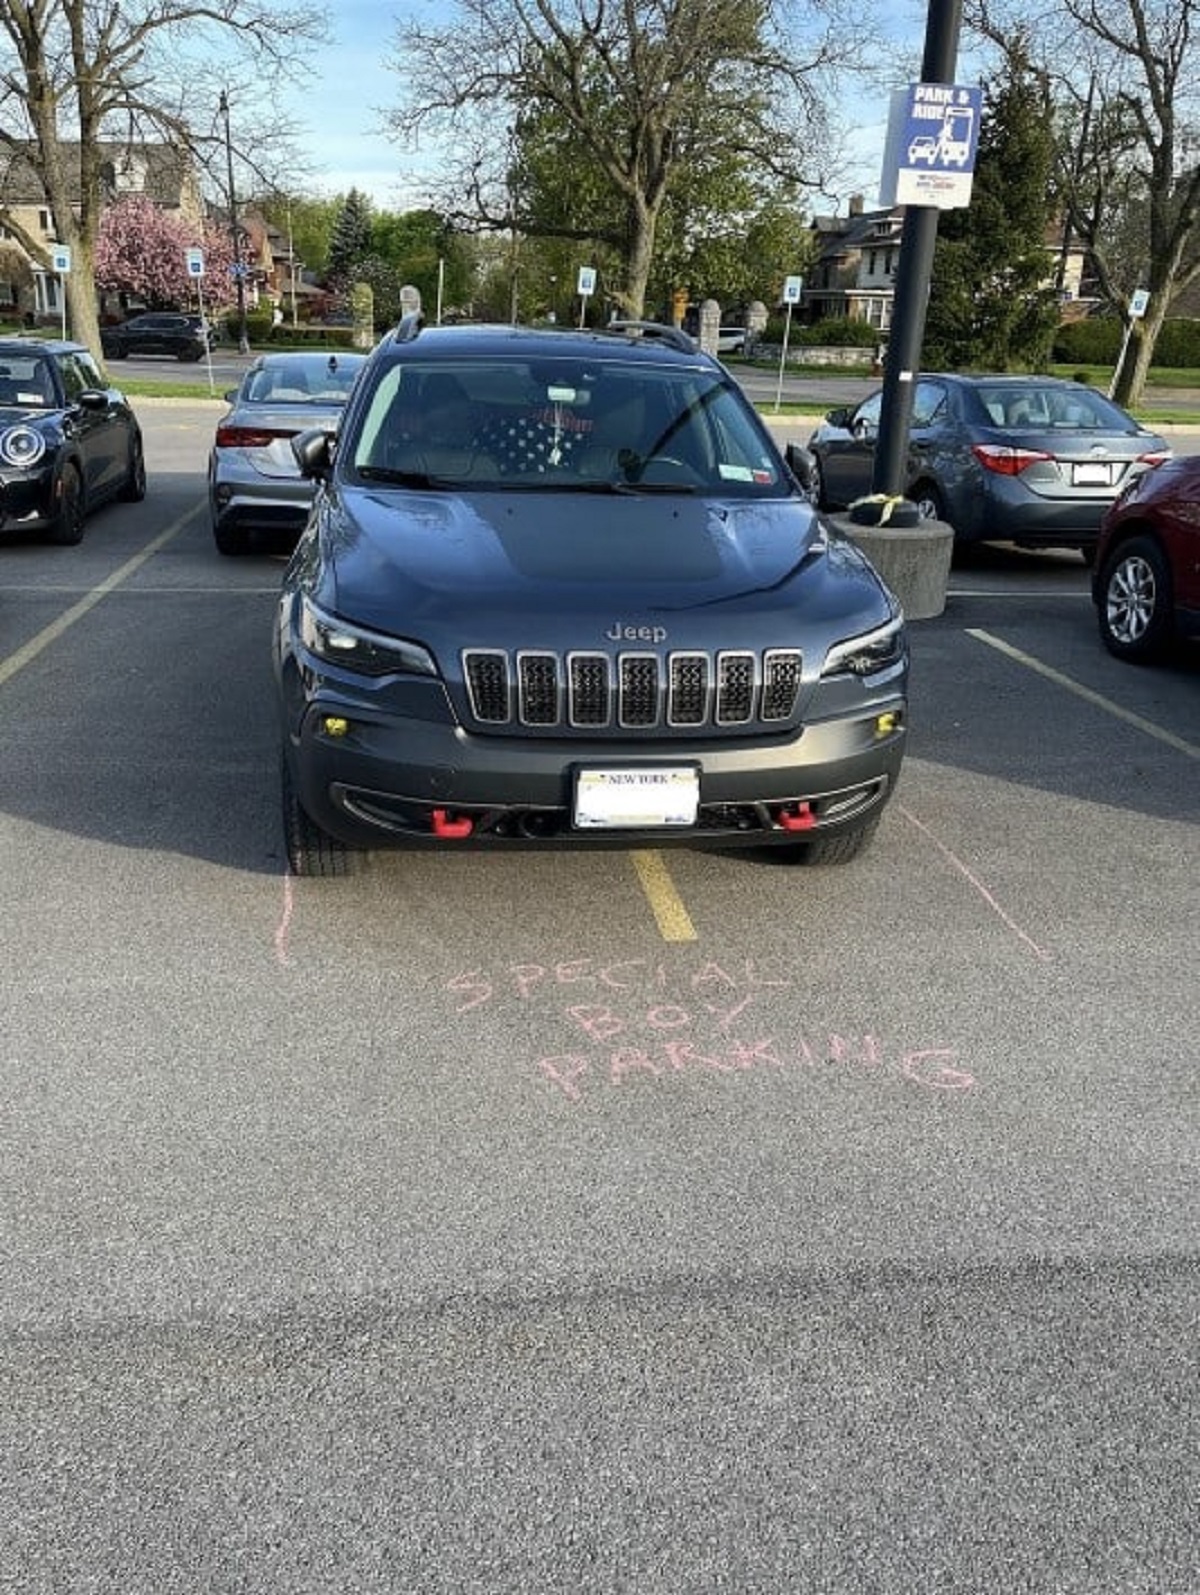 This car parks like this every day. Still parked there after the chalked message too.